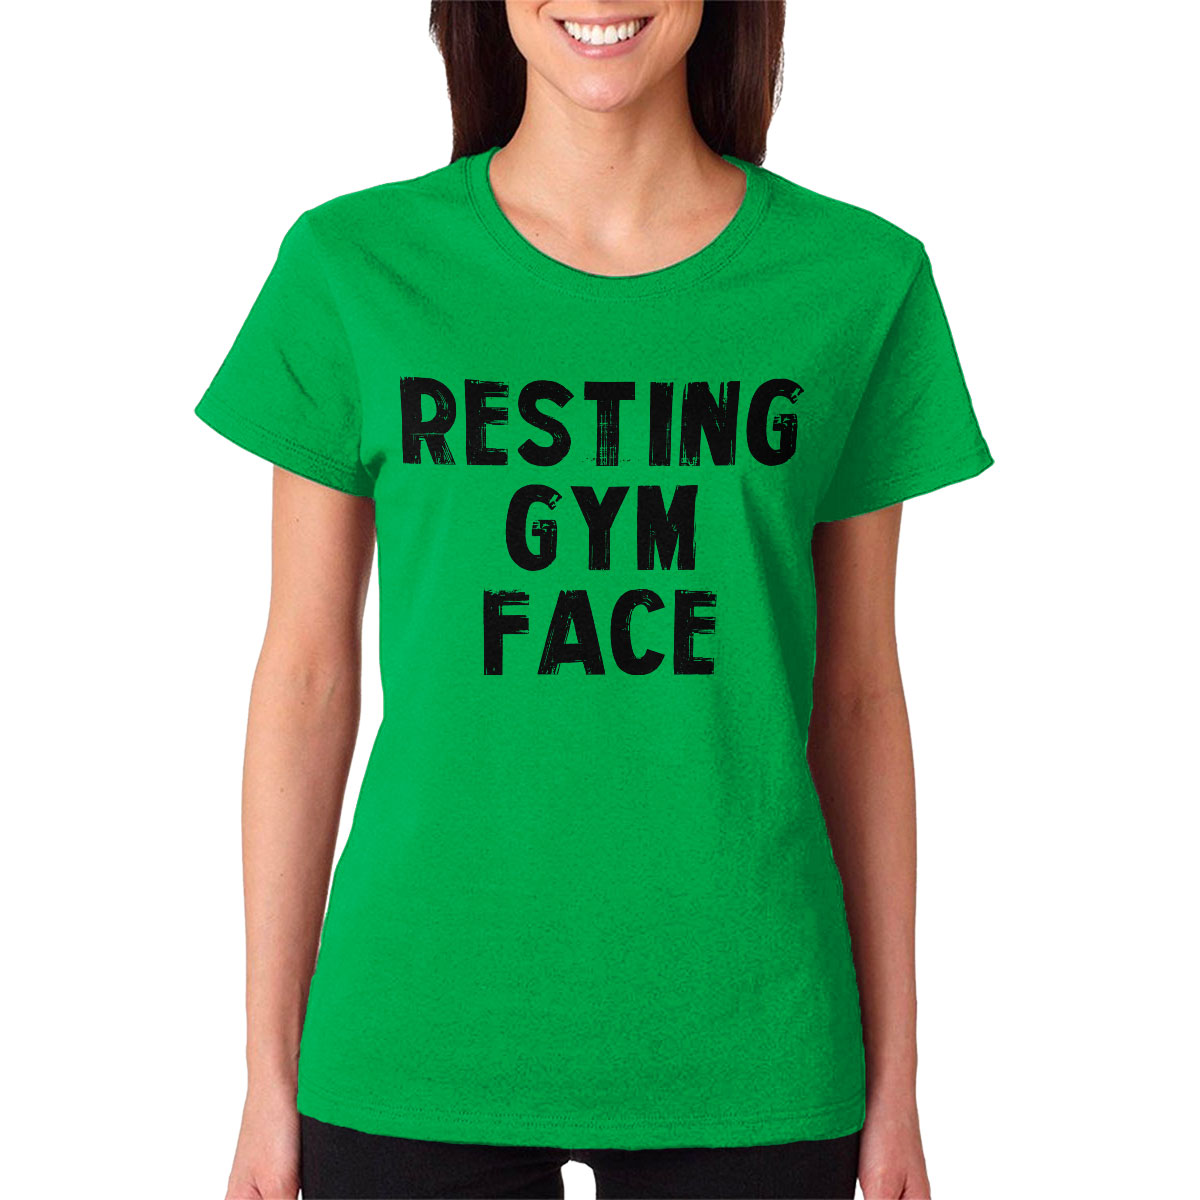 Resting Gym Face Funny Workout Fitness Crossfit Exercise Women's T